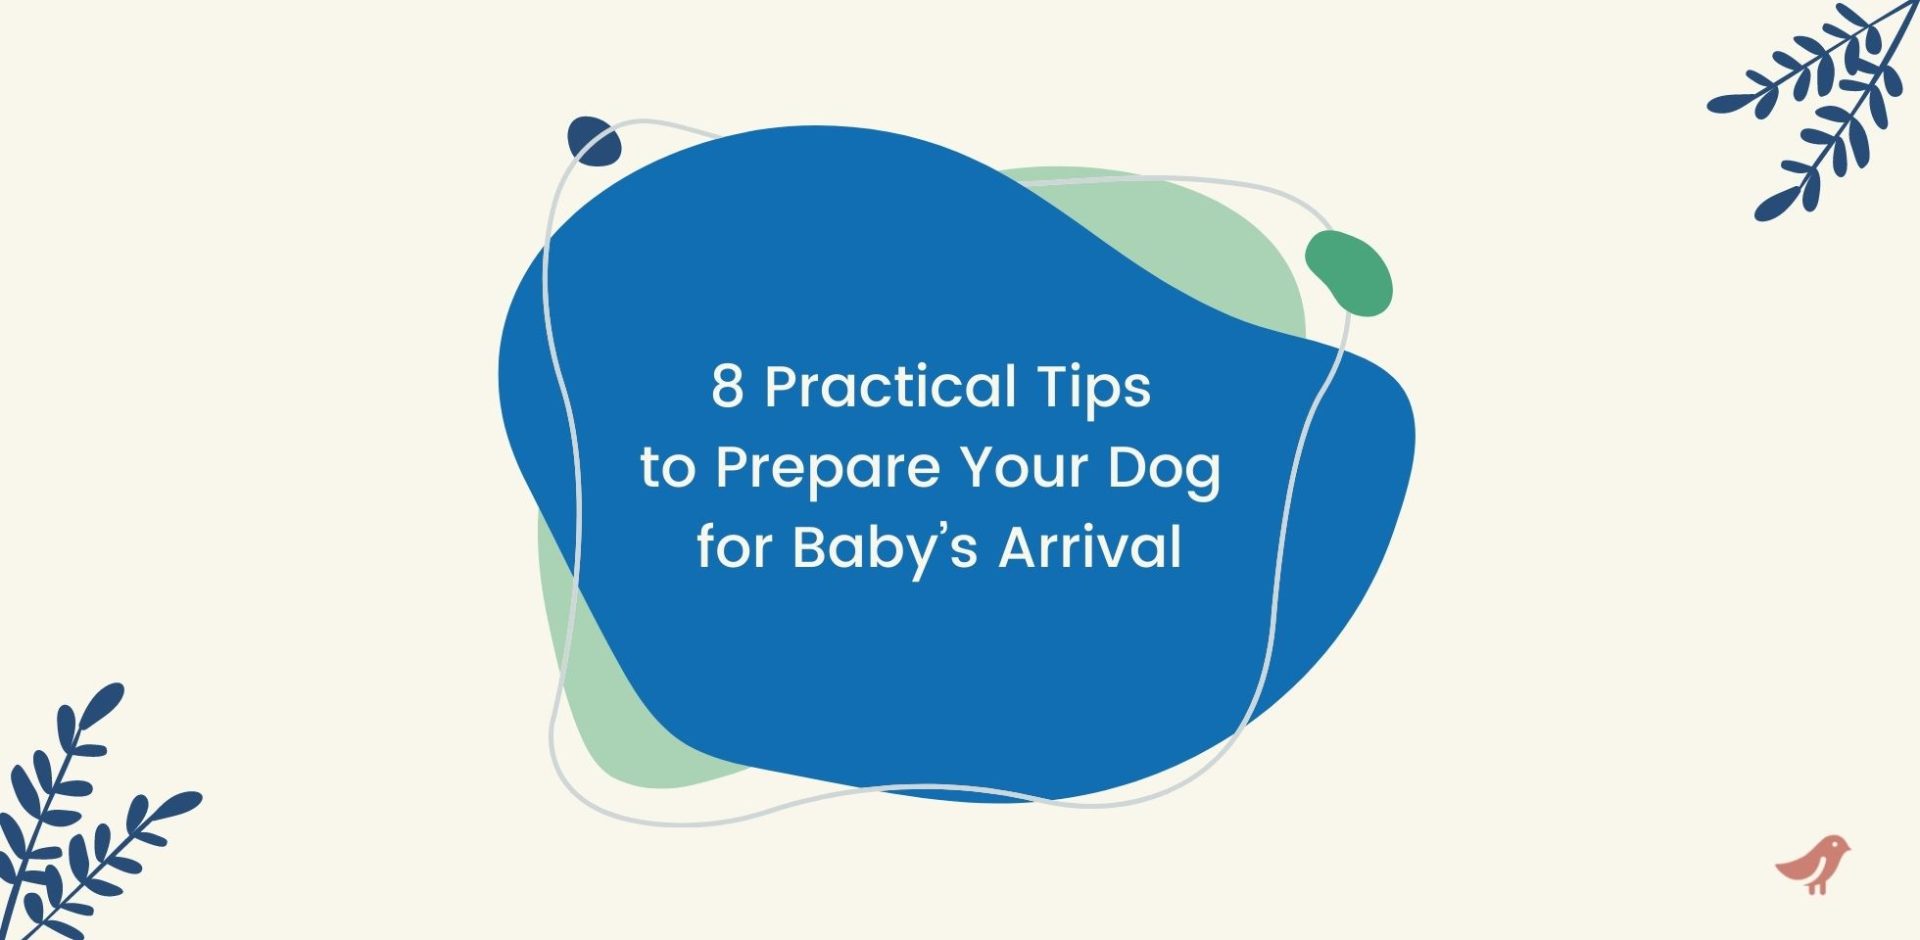 8 Practical Tips to Prepare Your Dog for Baby’s Arrival.